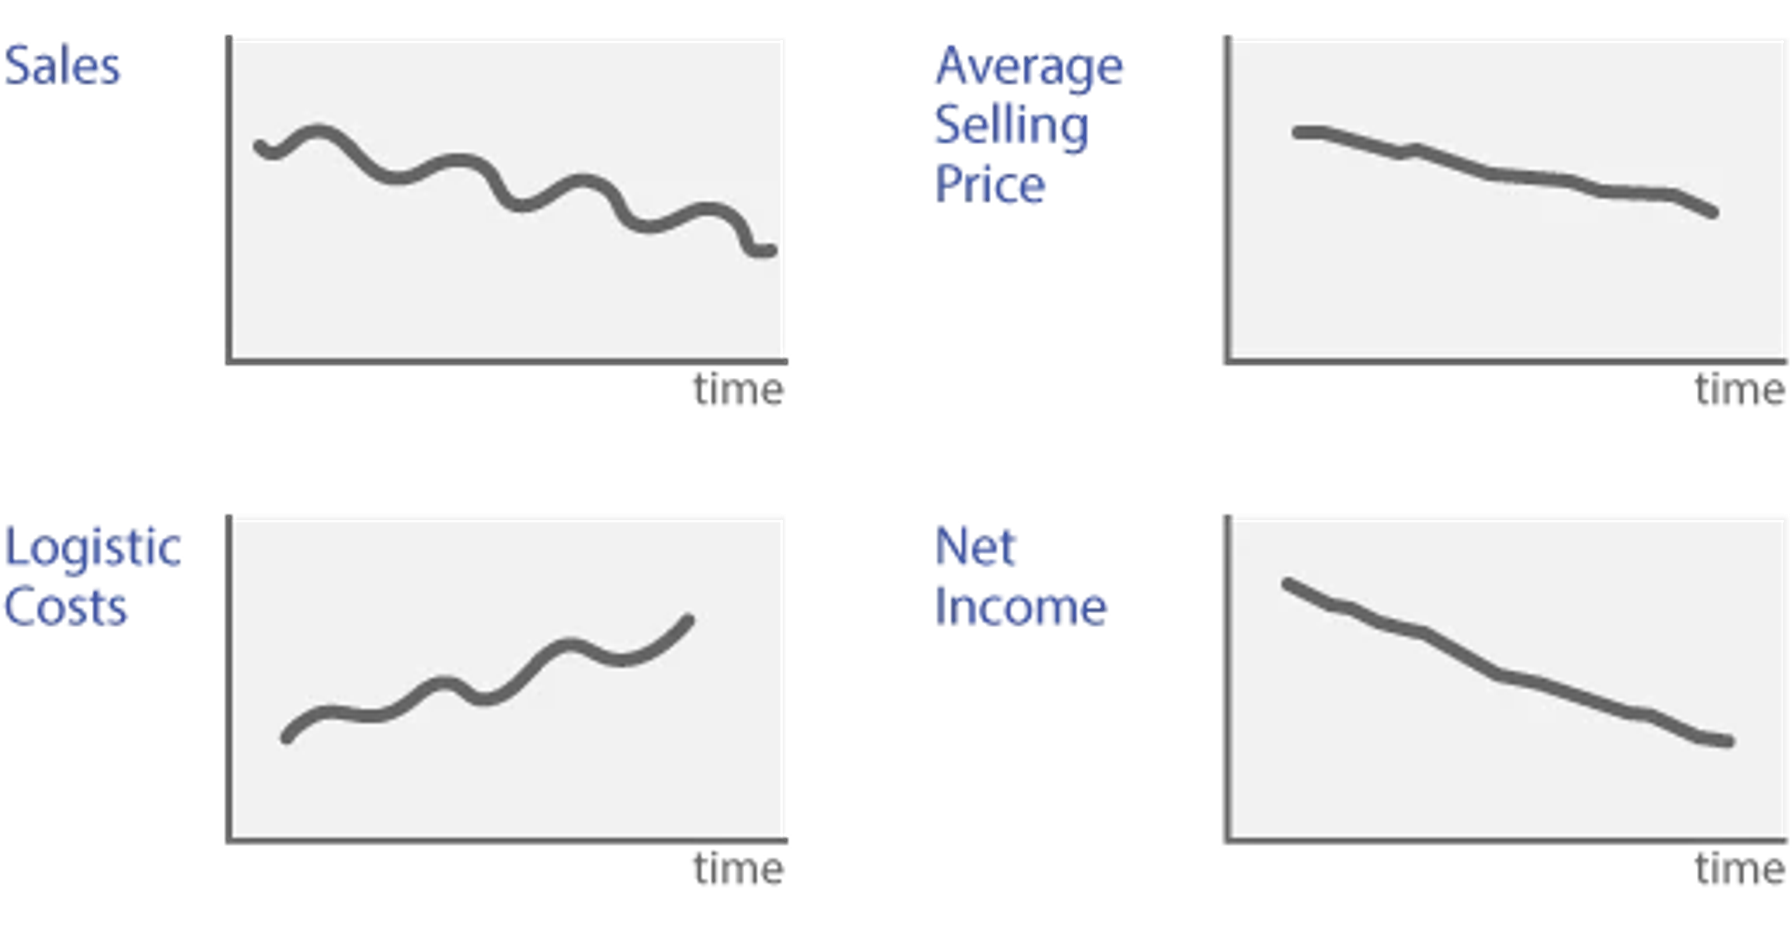 Example of graphing indicators of behavioral patterns: includes "sales", "average selling price", "logistic costs", and "net income"